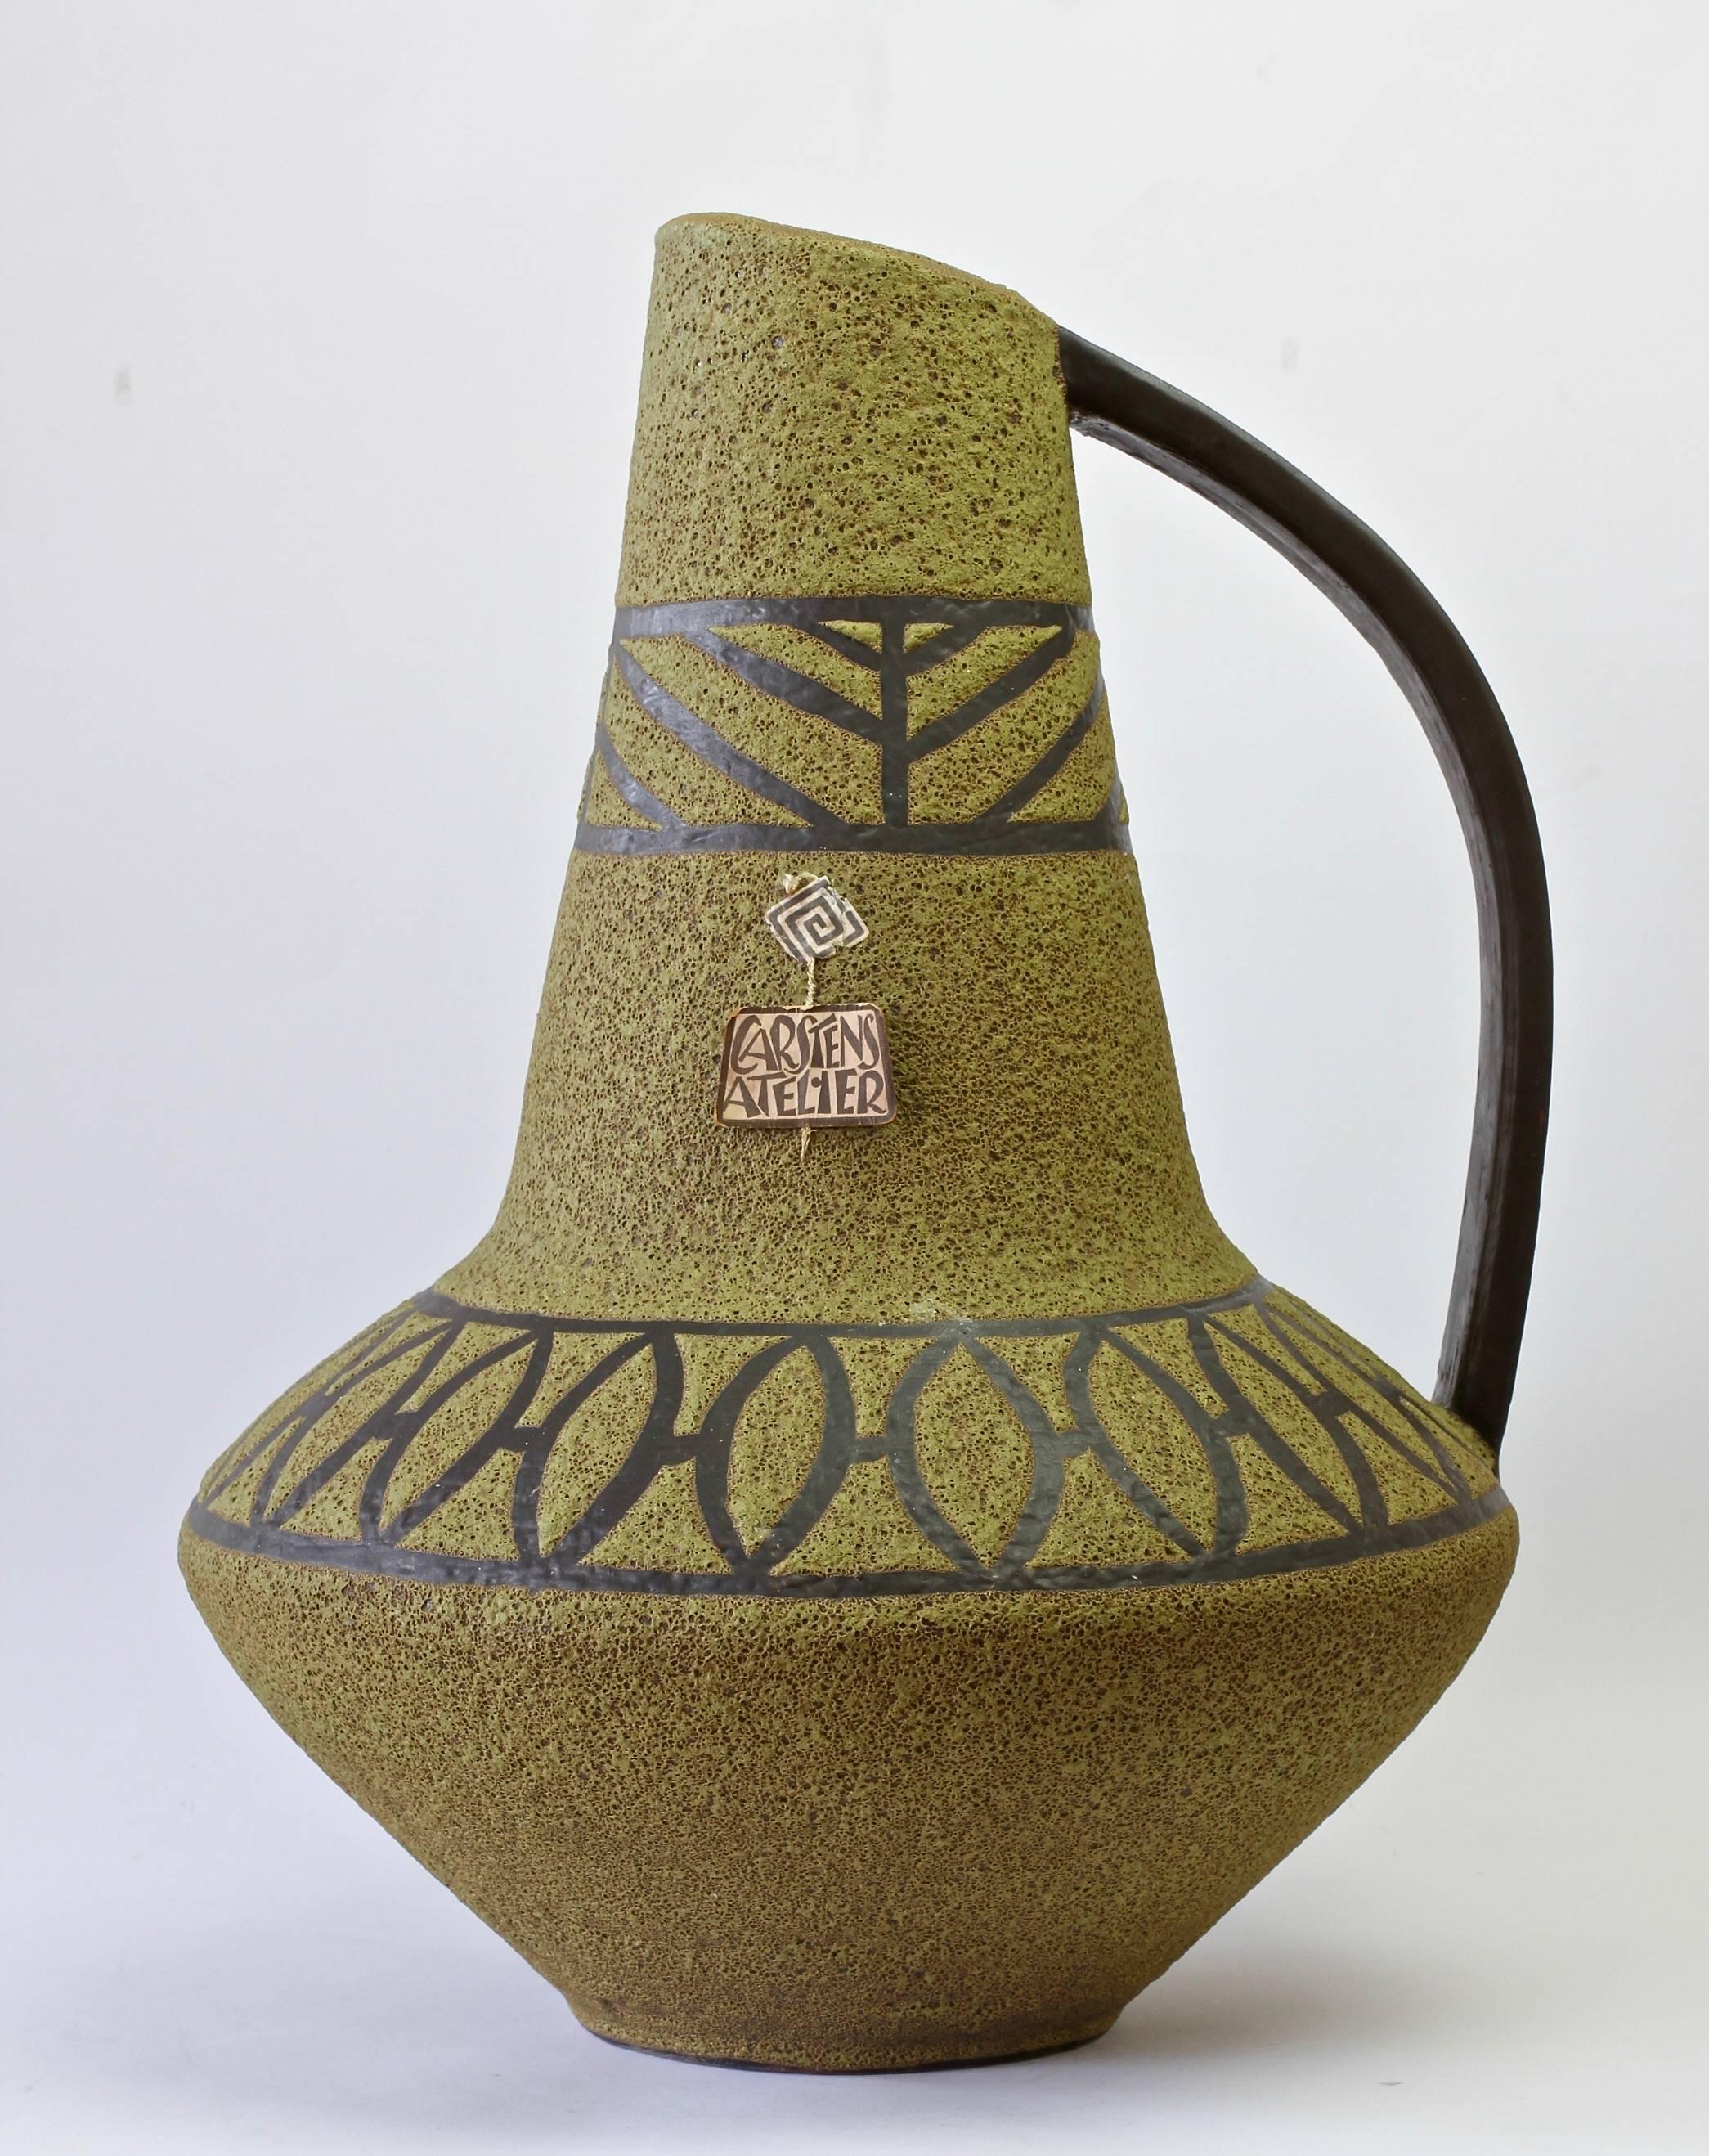 1970s Large Green Lava Glazed West German Pottery Floor Vase by Carstens Atelier For Sale 5